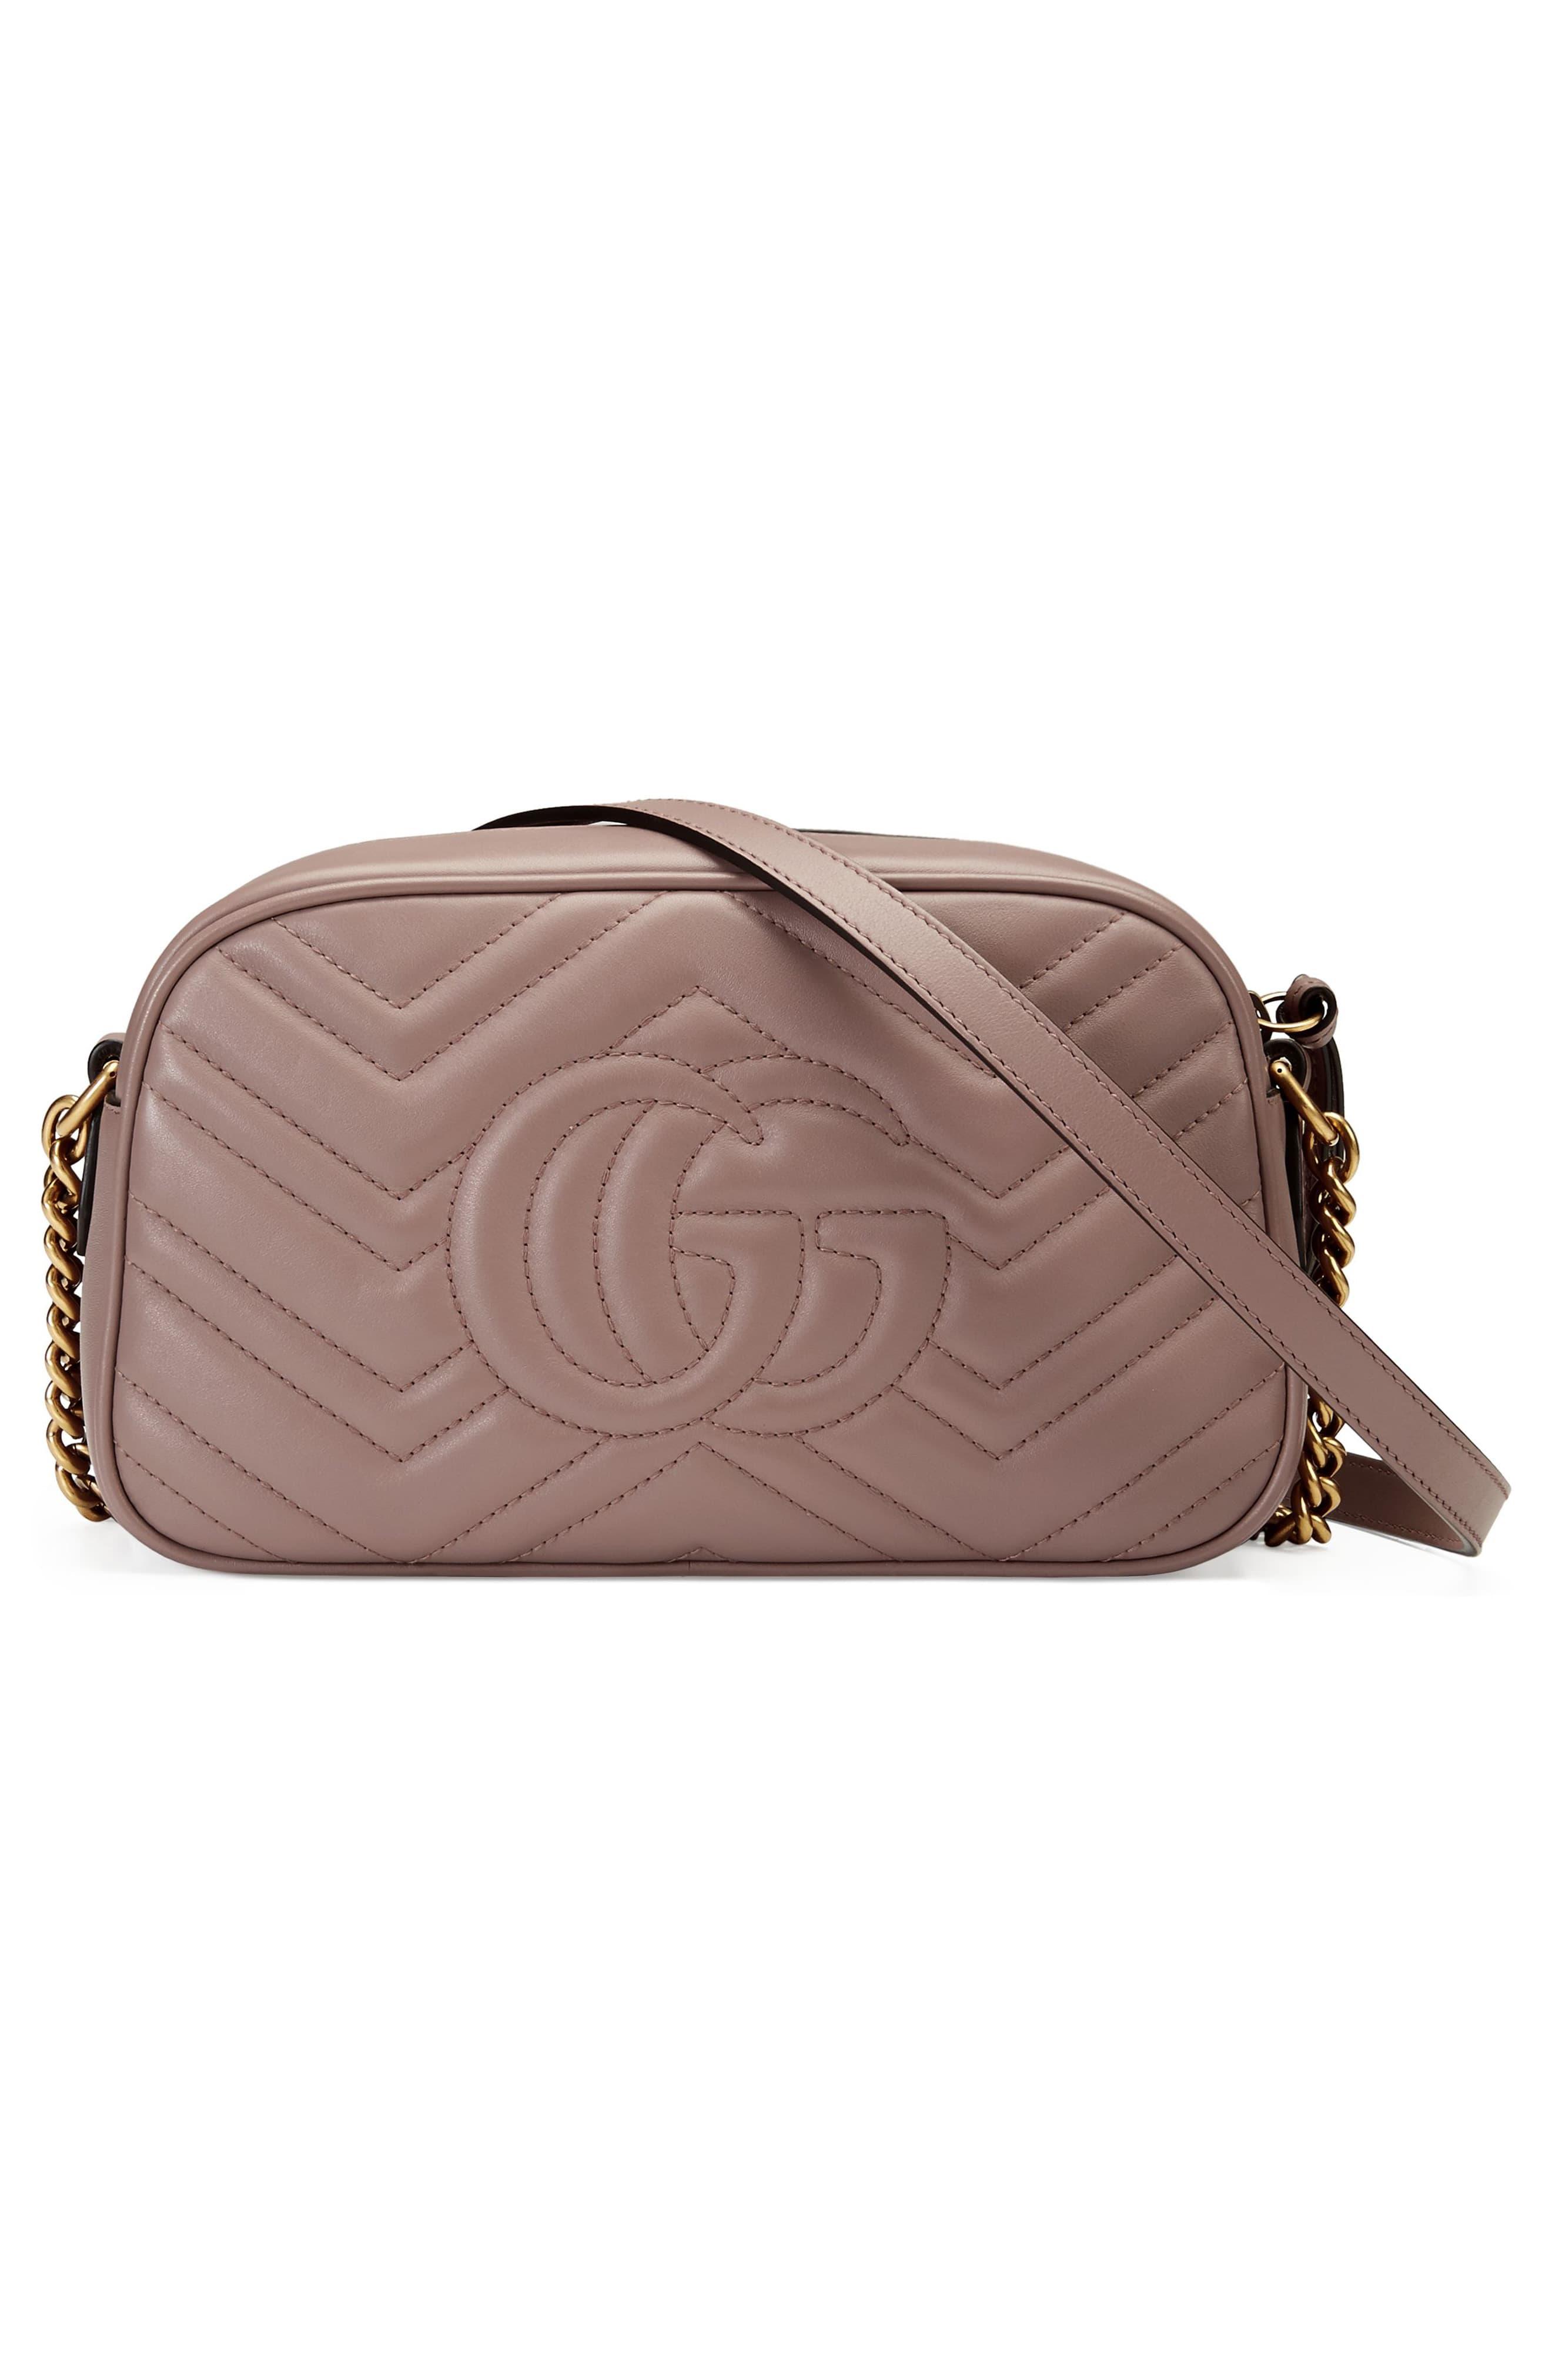 Gucci Small Gg Marmont 2.0 Matelassé Leather Camera Bag in Pink - Lyst